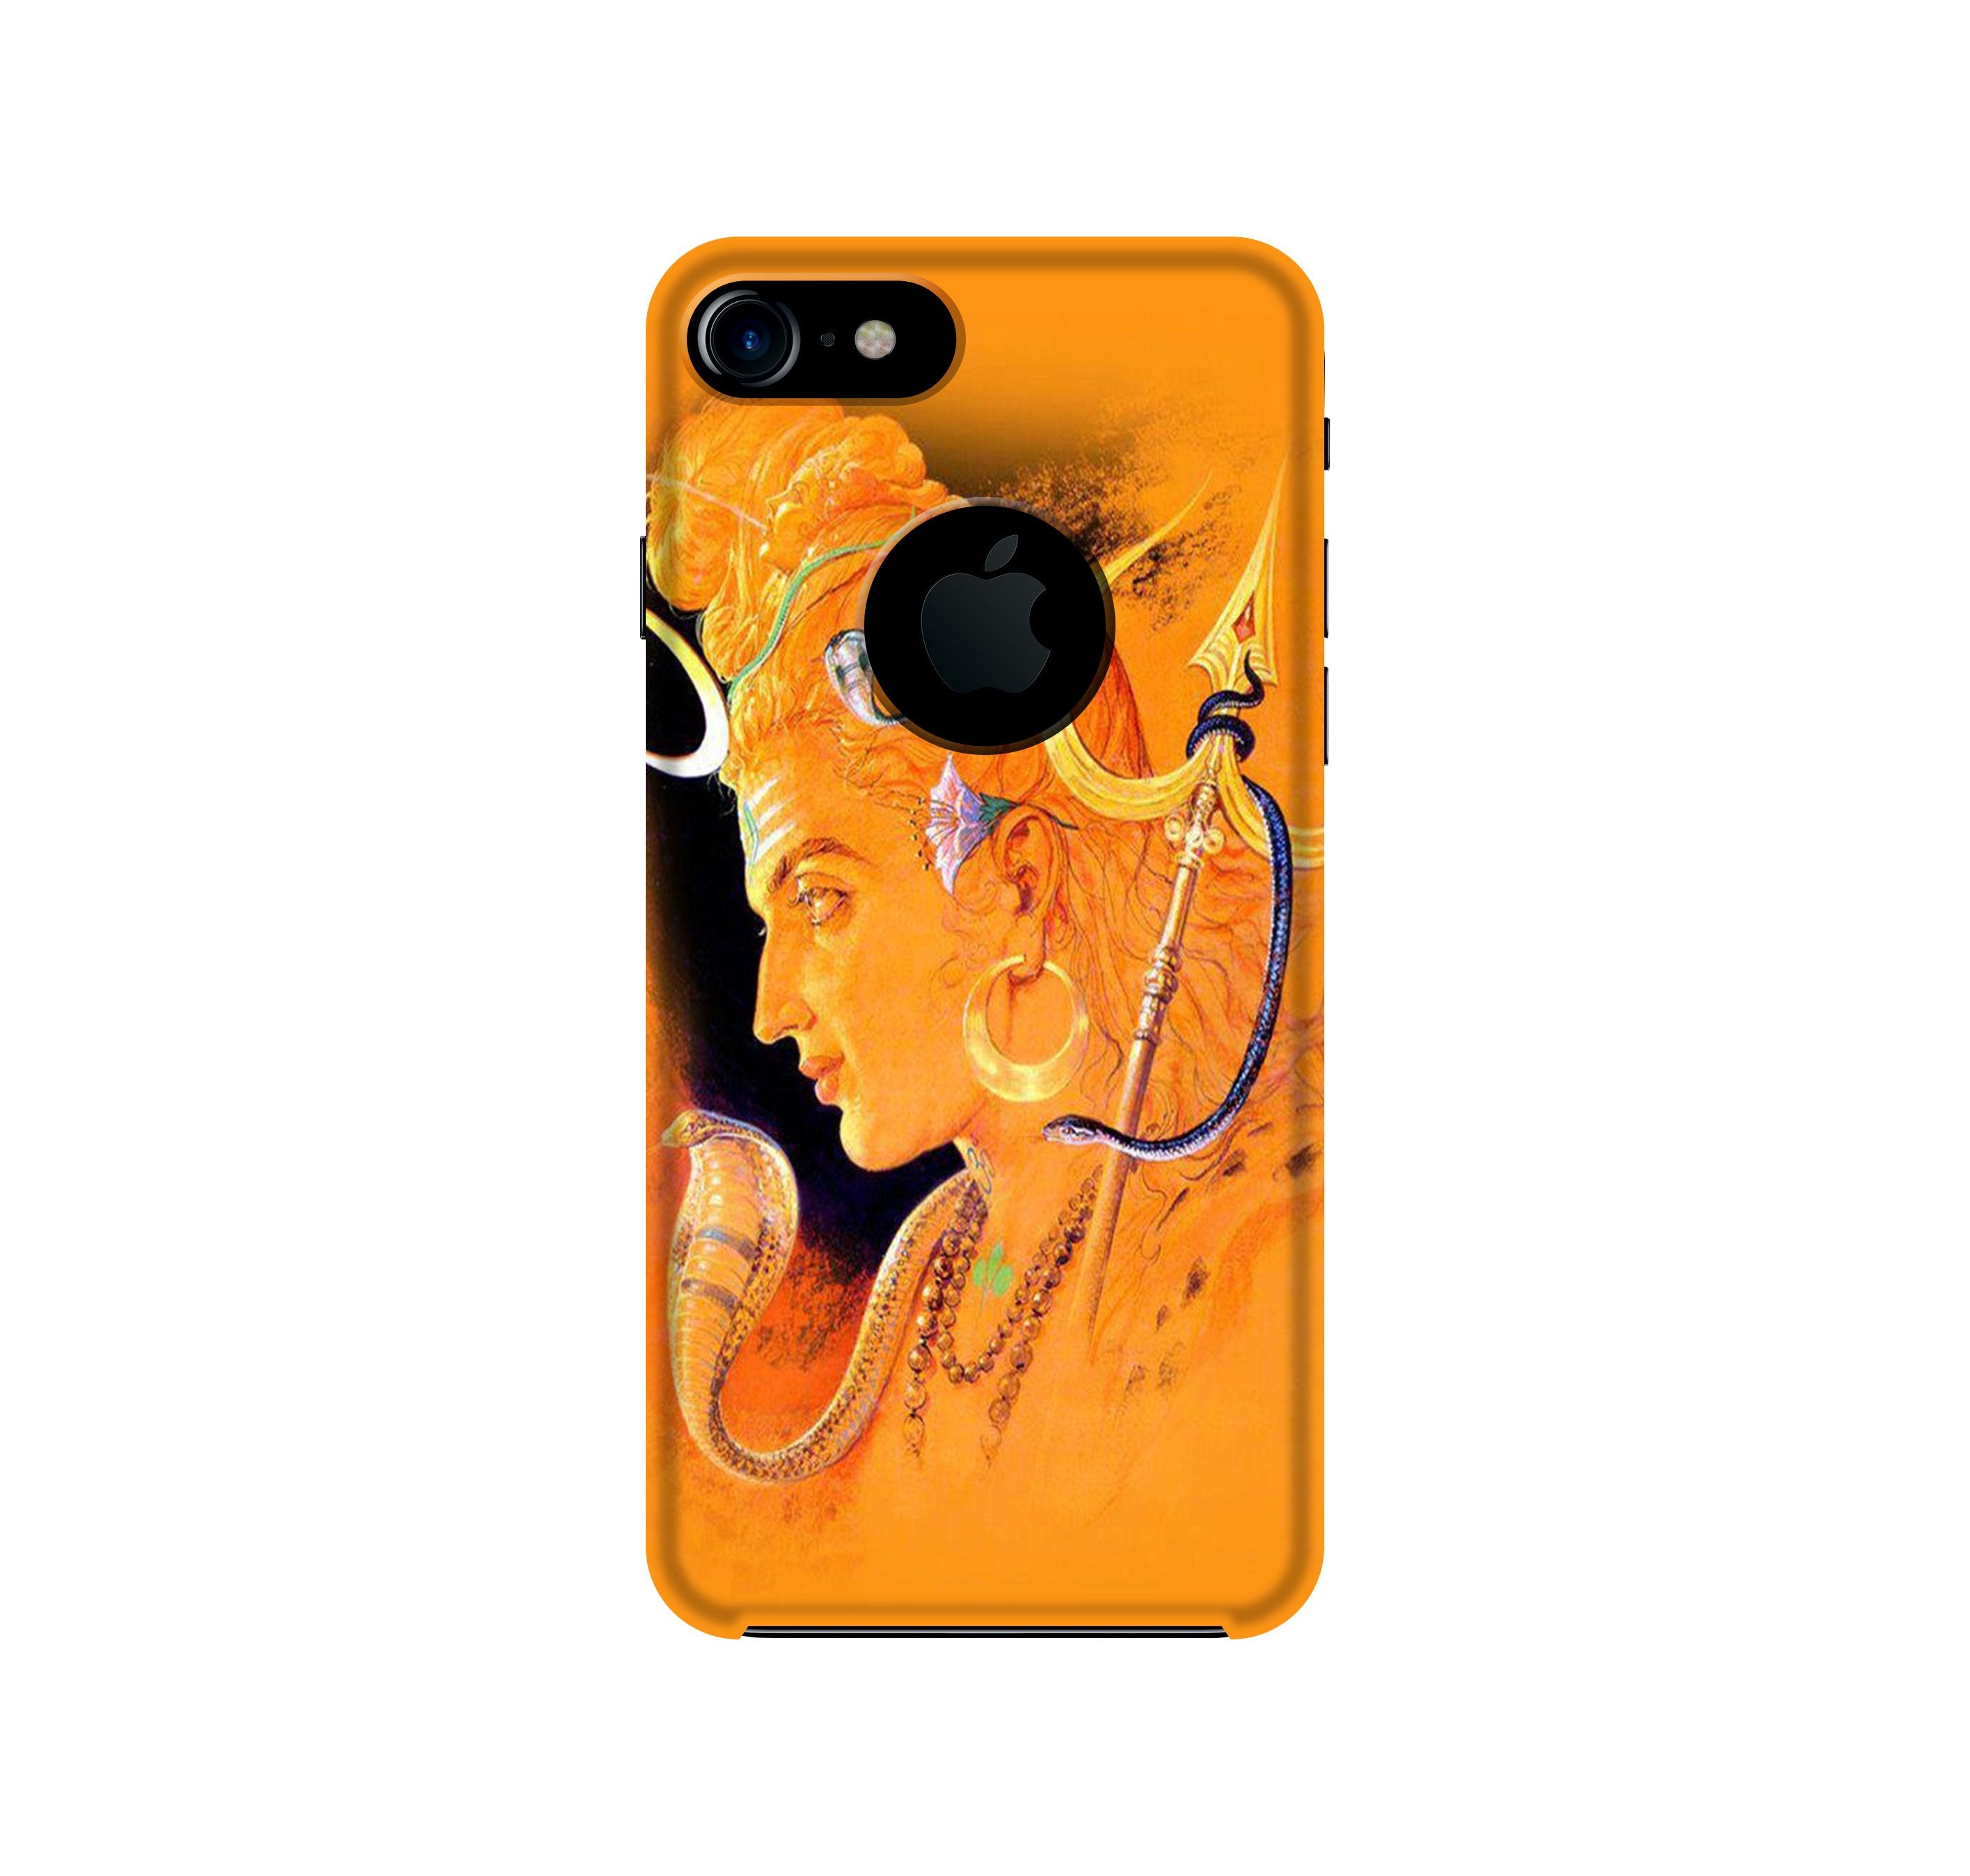 Lord Shiva Case for iPhone 7 logo cut (Design No. 293)